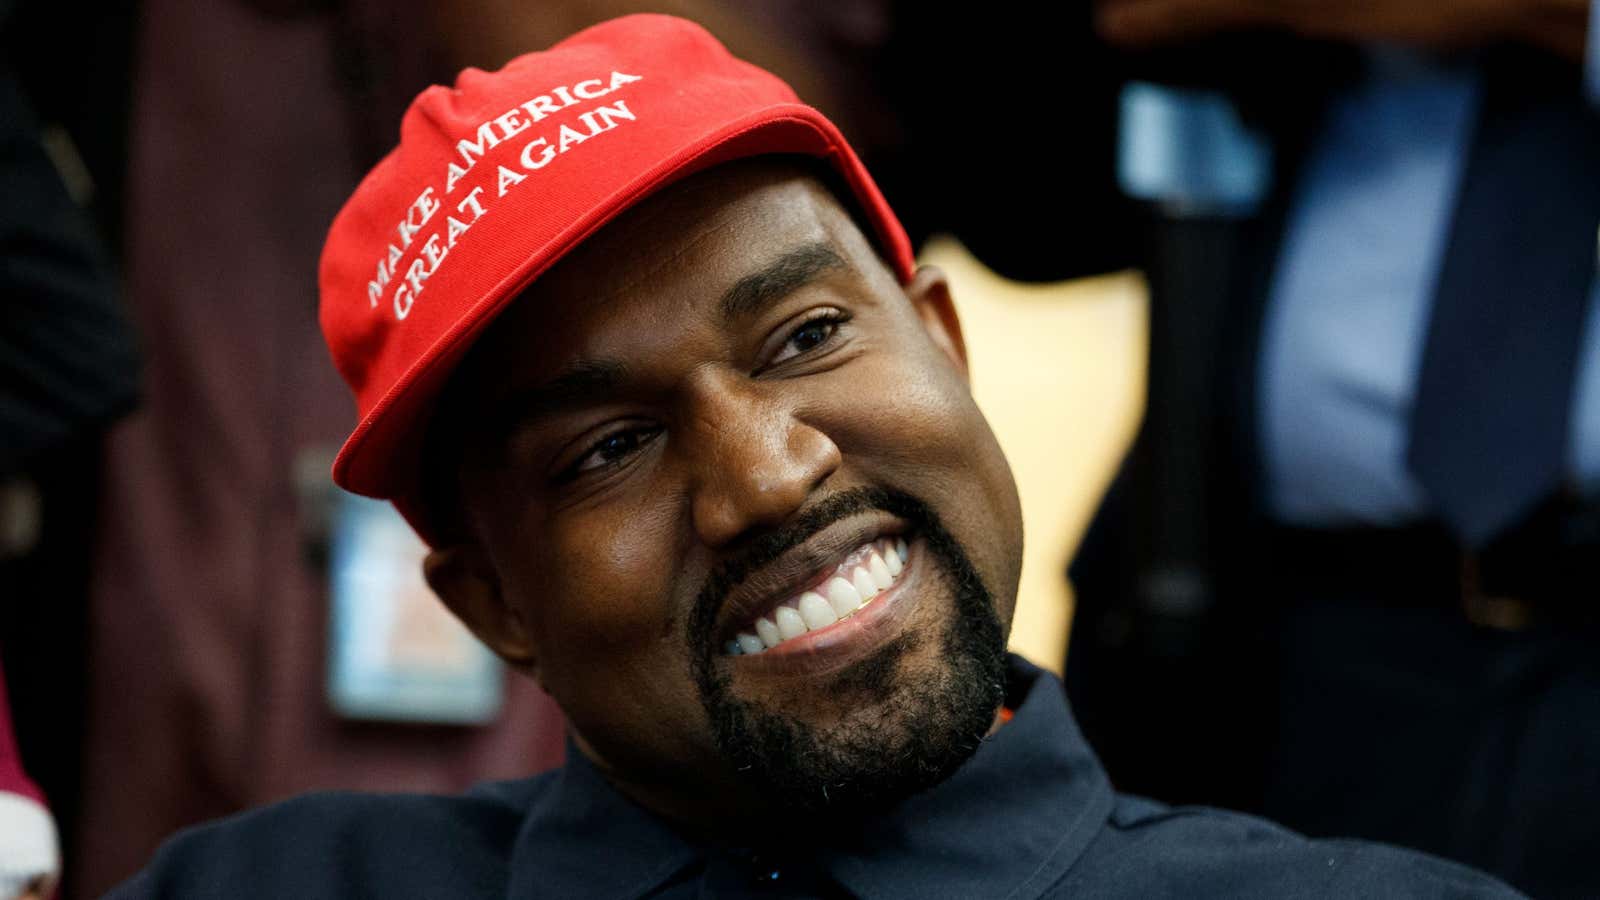 Ye seems to be designing political merch now, too.